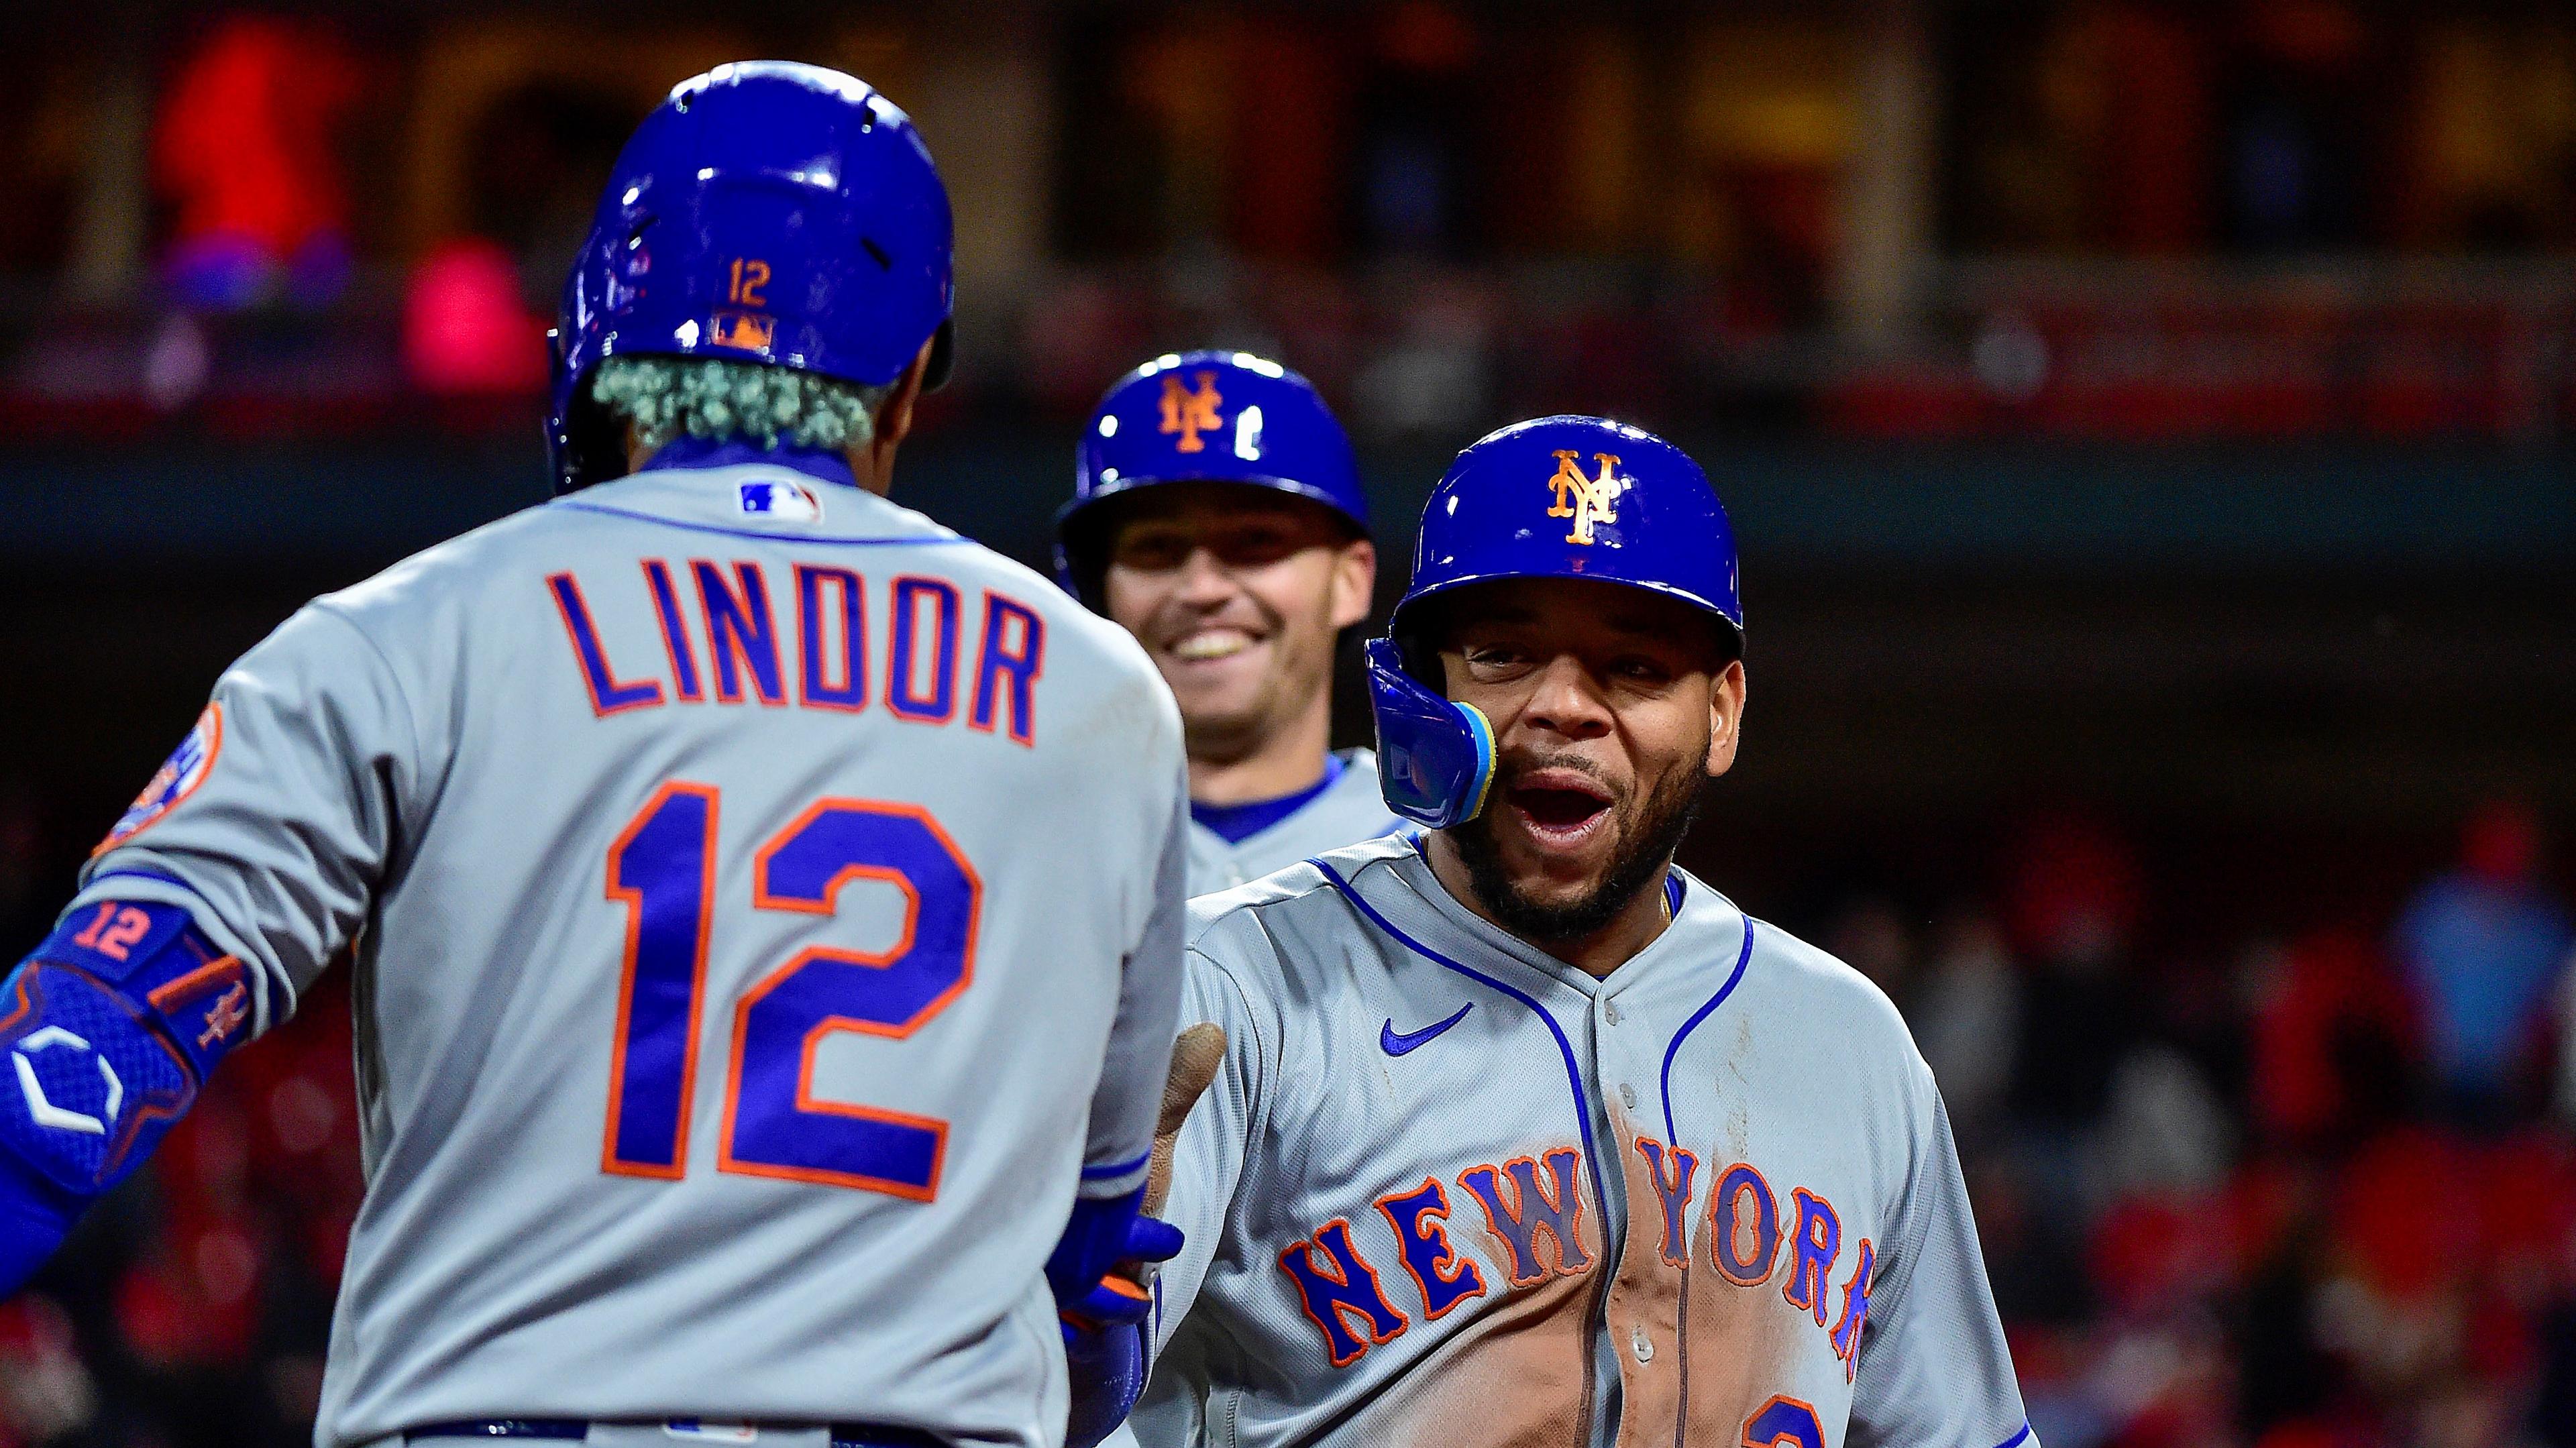 Apr 25, 2022; St. Louis, Missouri, USA; New York Mets pinch hitter Dominic Smith (2) celebrates with shortstop Francisco Lindor (12) after driving in two runs on a single and scoring against the St. Louis Cardinals during the ninth inning at Busch Stadium. Mandatory Credit: Jeff Curry-USA TODAY Sports / Jeff Curry-USA TODAY Sports